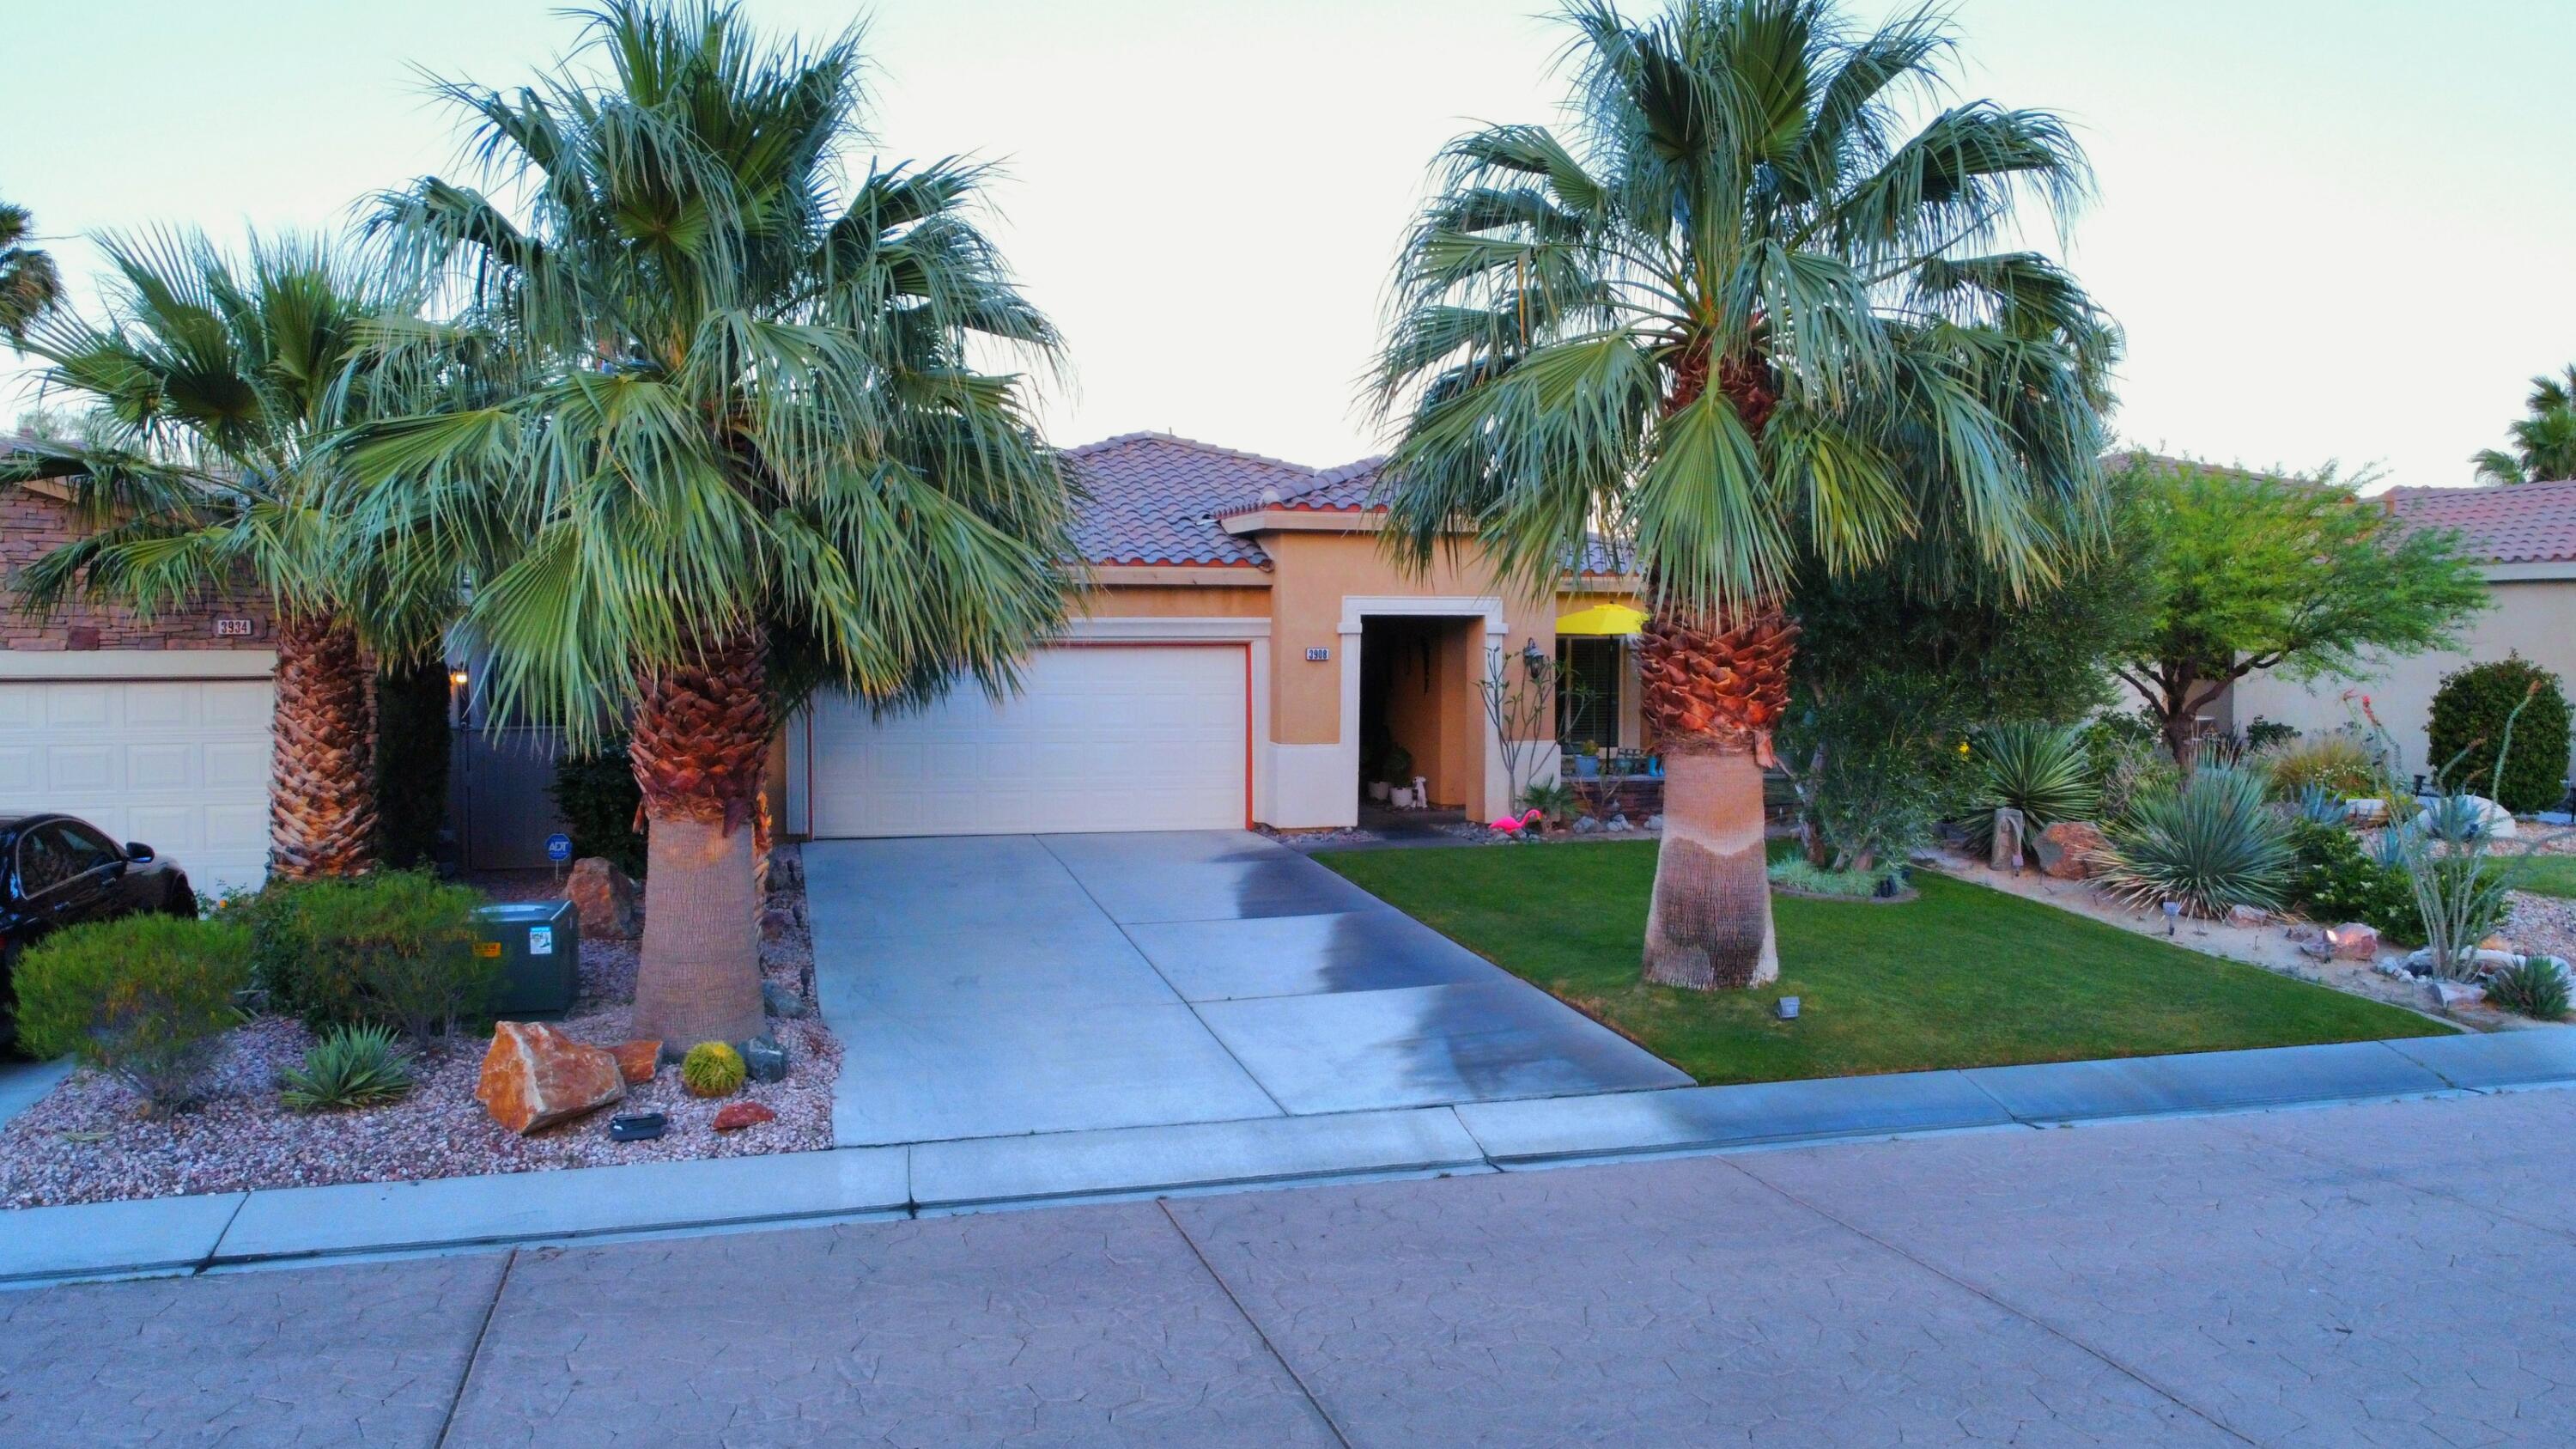 a palm tree sitting in front of a house with a small yard and palm trees